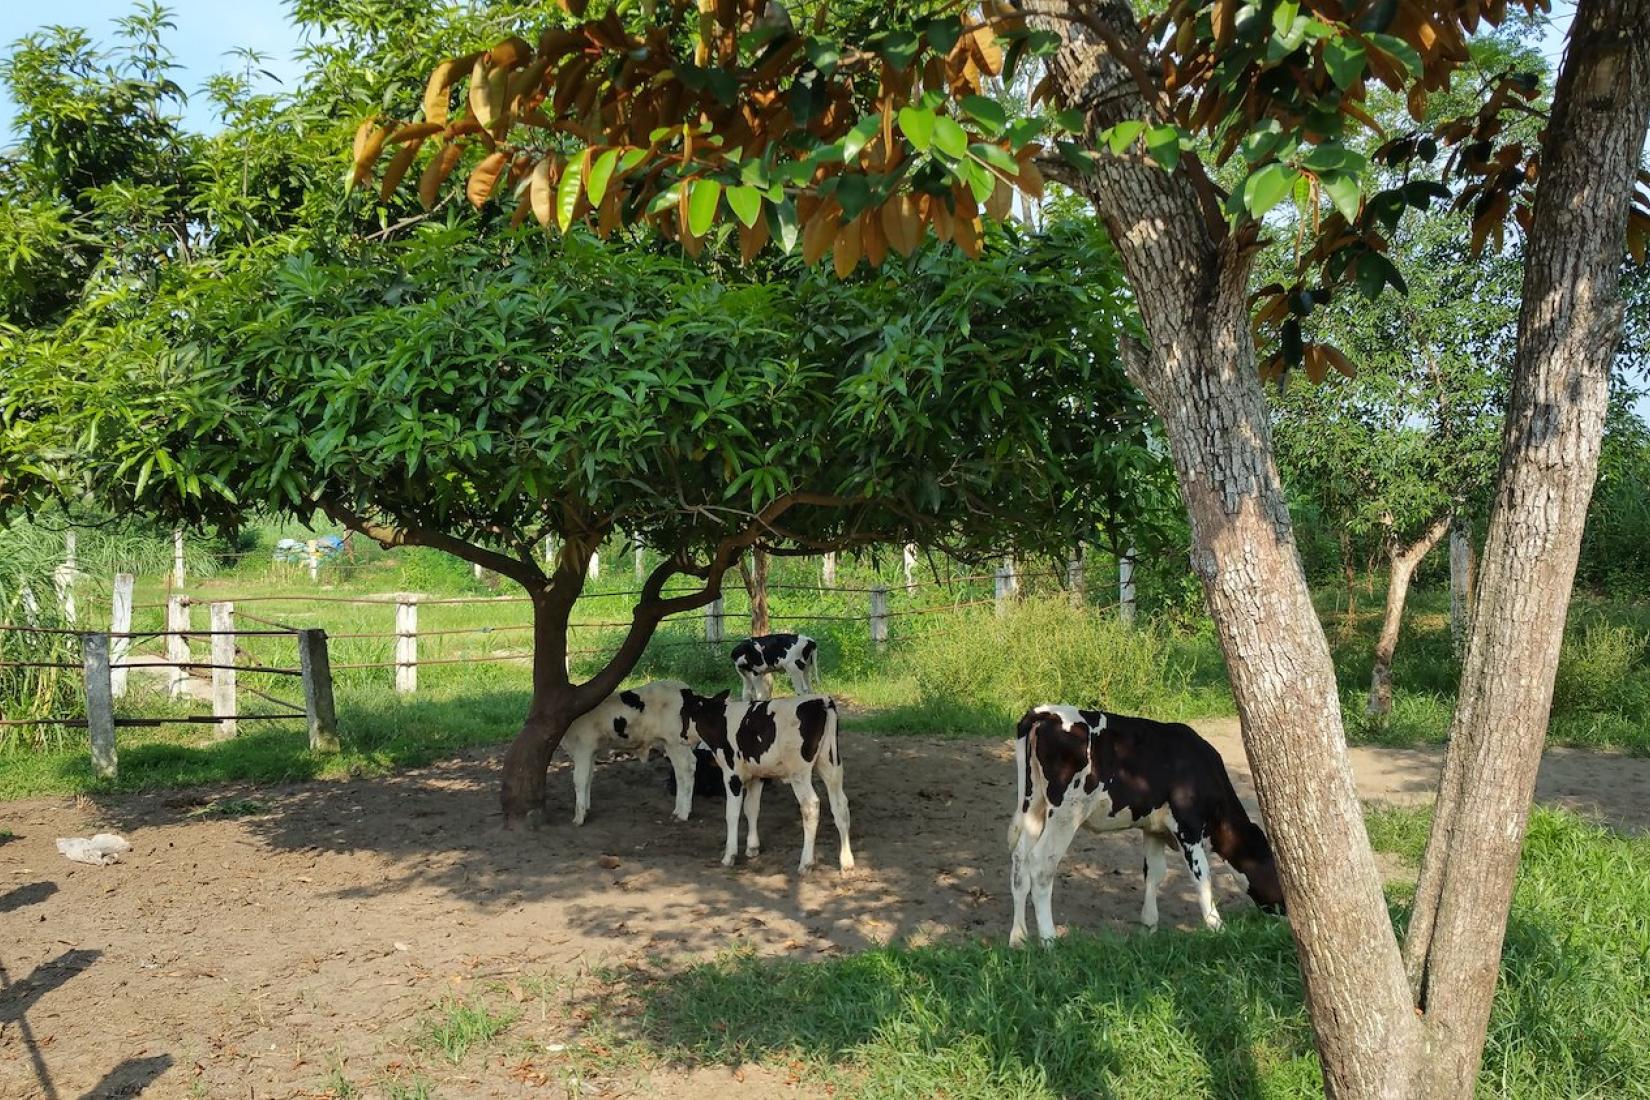 Calves standing in a small pen under trees